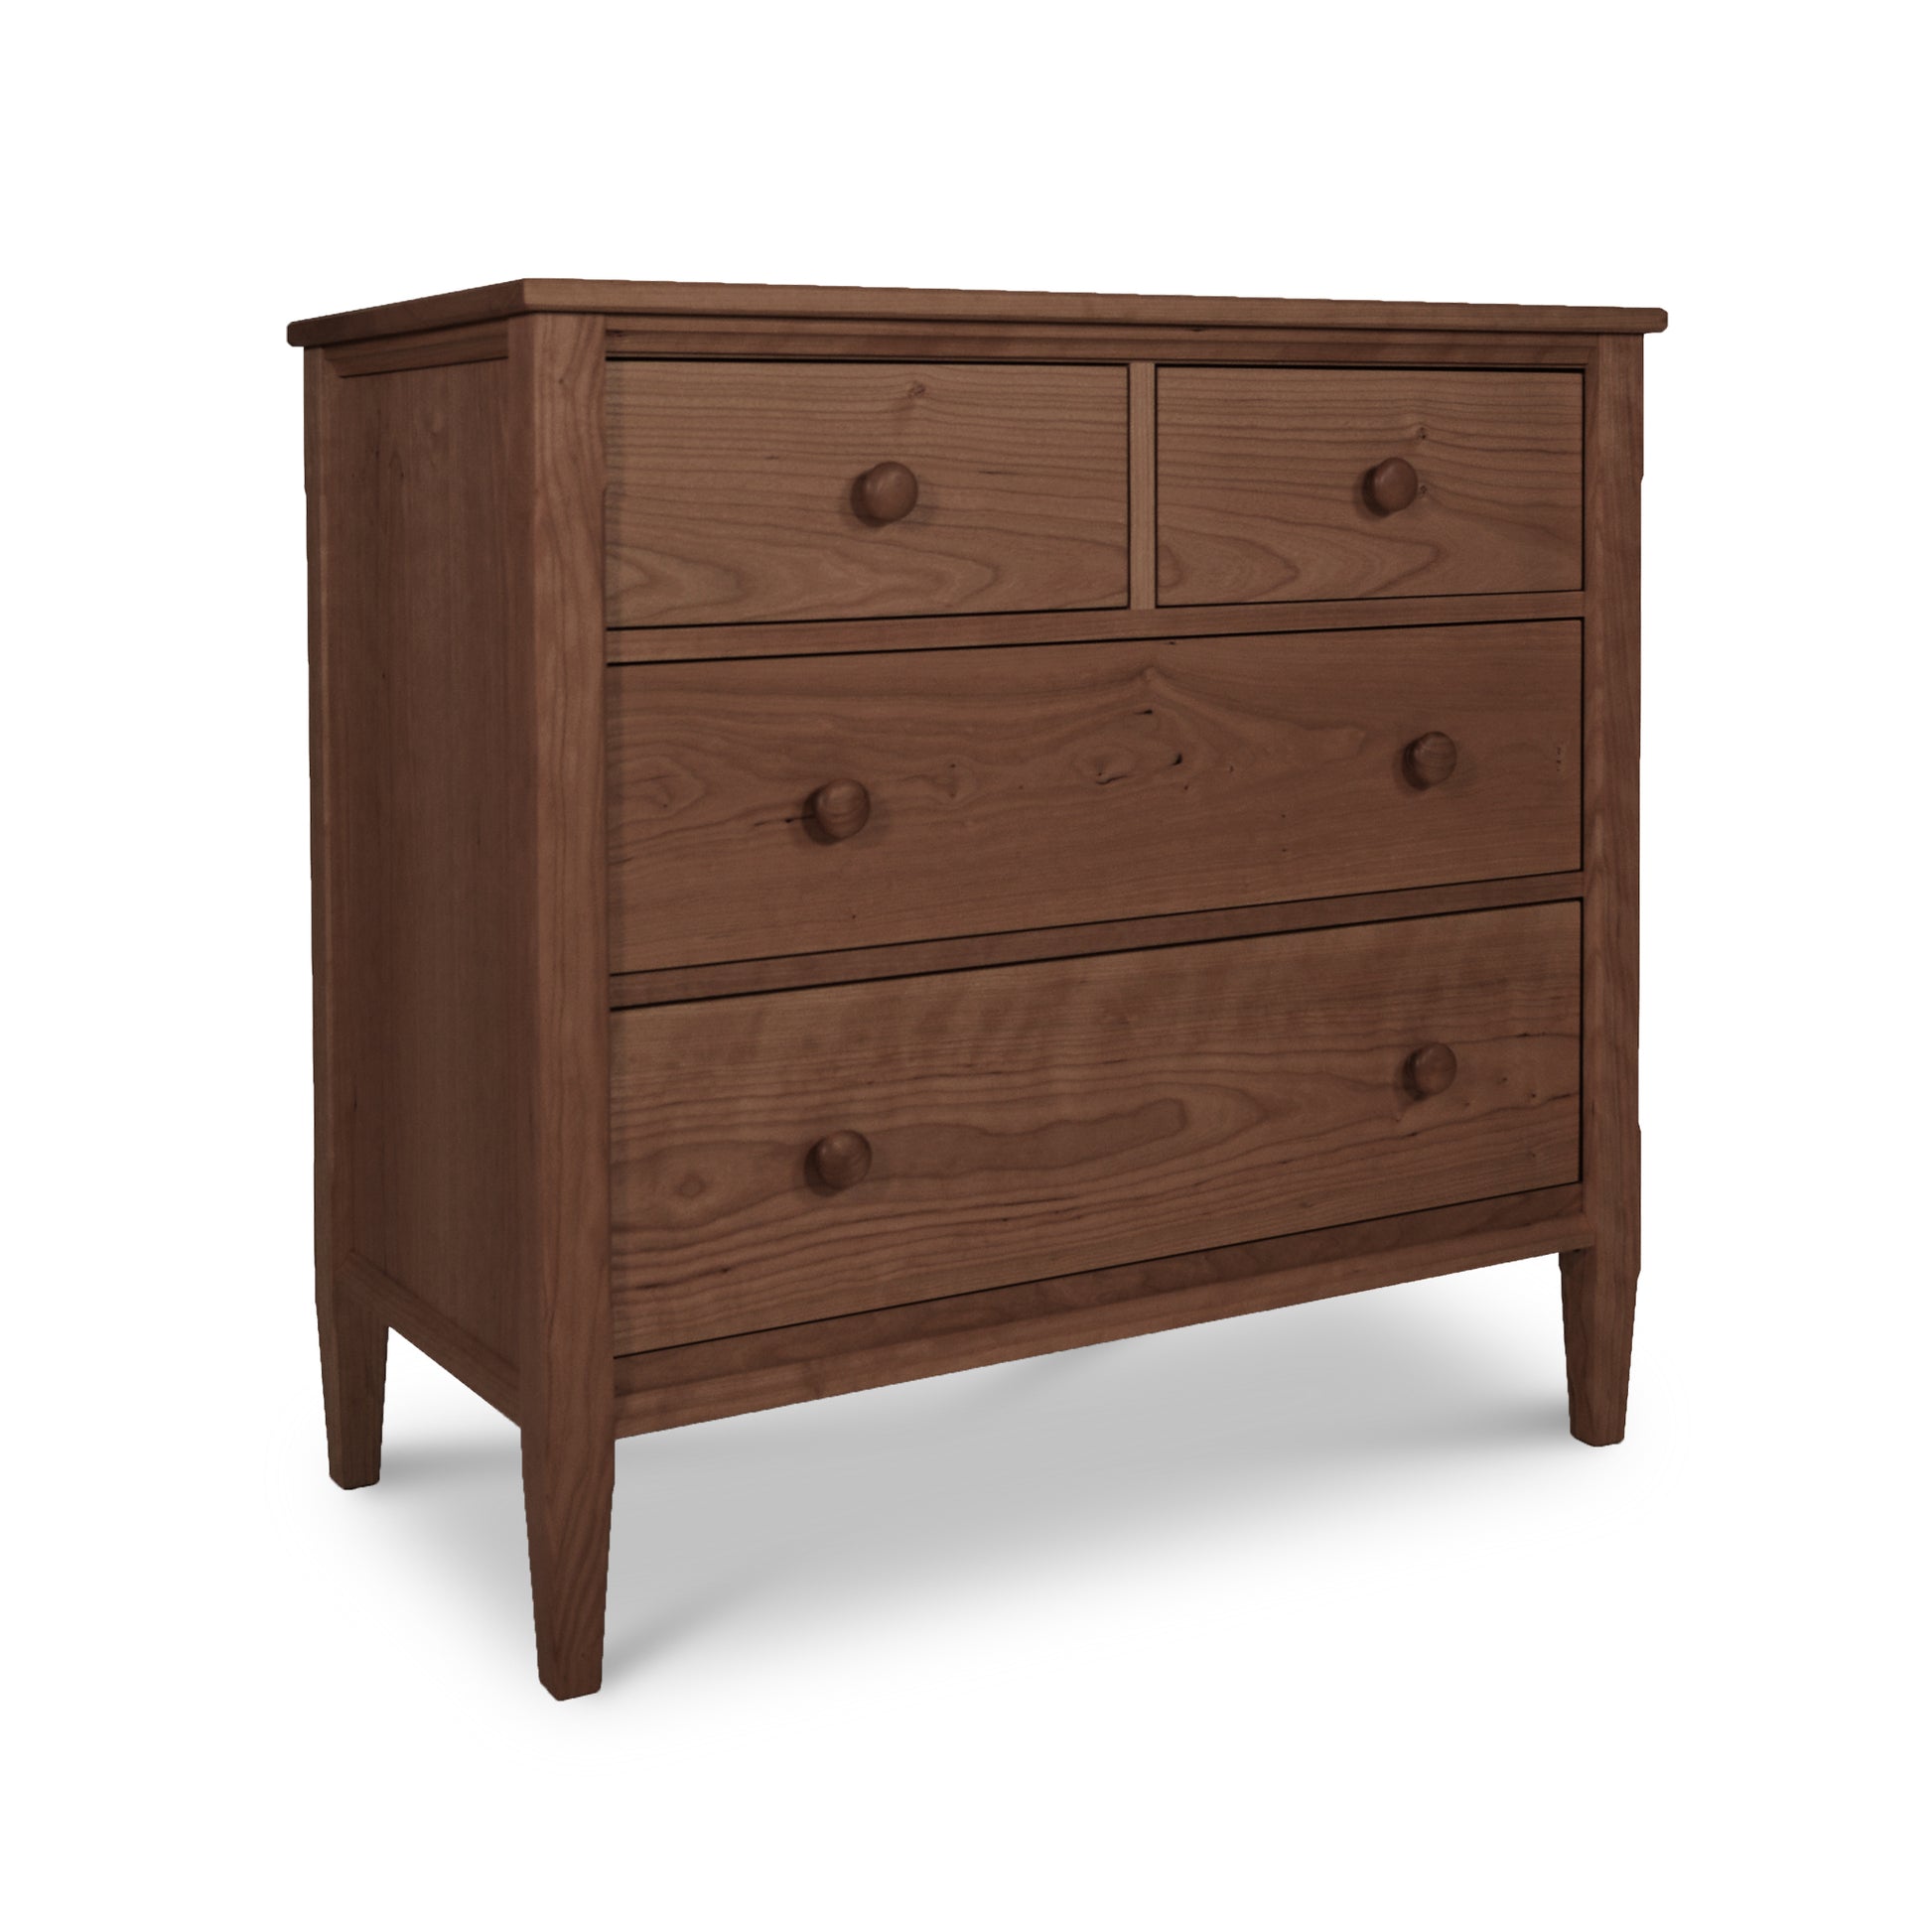 A Vermont Shaker 4-Drawer Chest by Maple Corner Woodworks: two small drawers at the top and two larger drawers below, set on angled legs. The dresser has round knobs and is crafted from solid cherry wood.